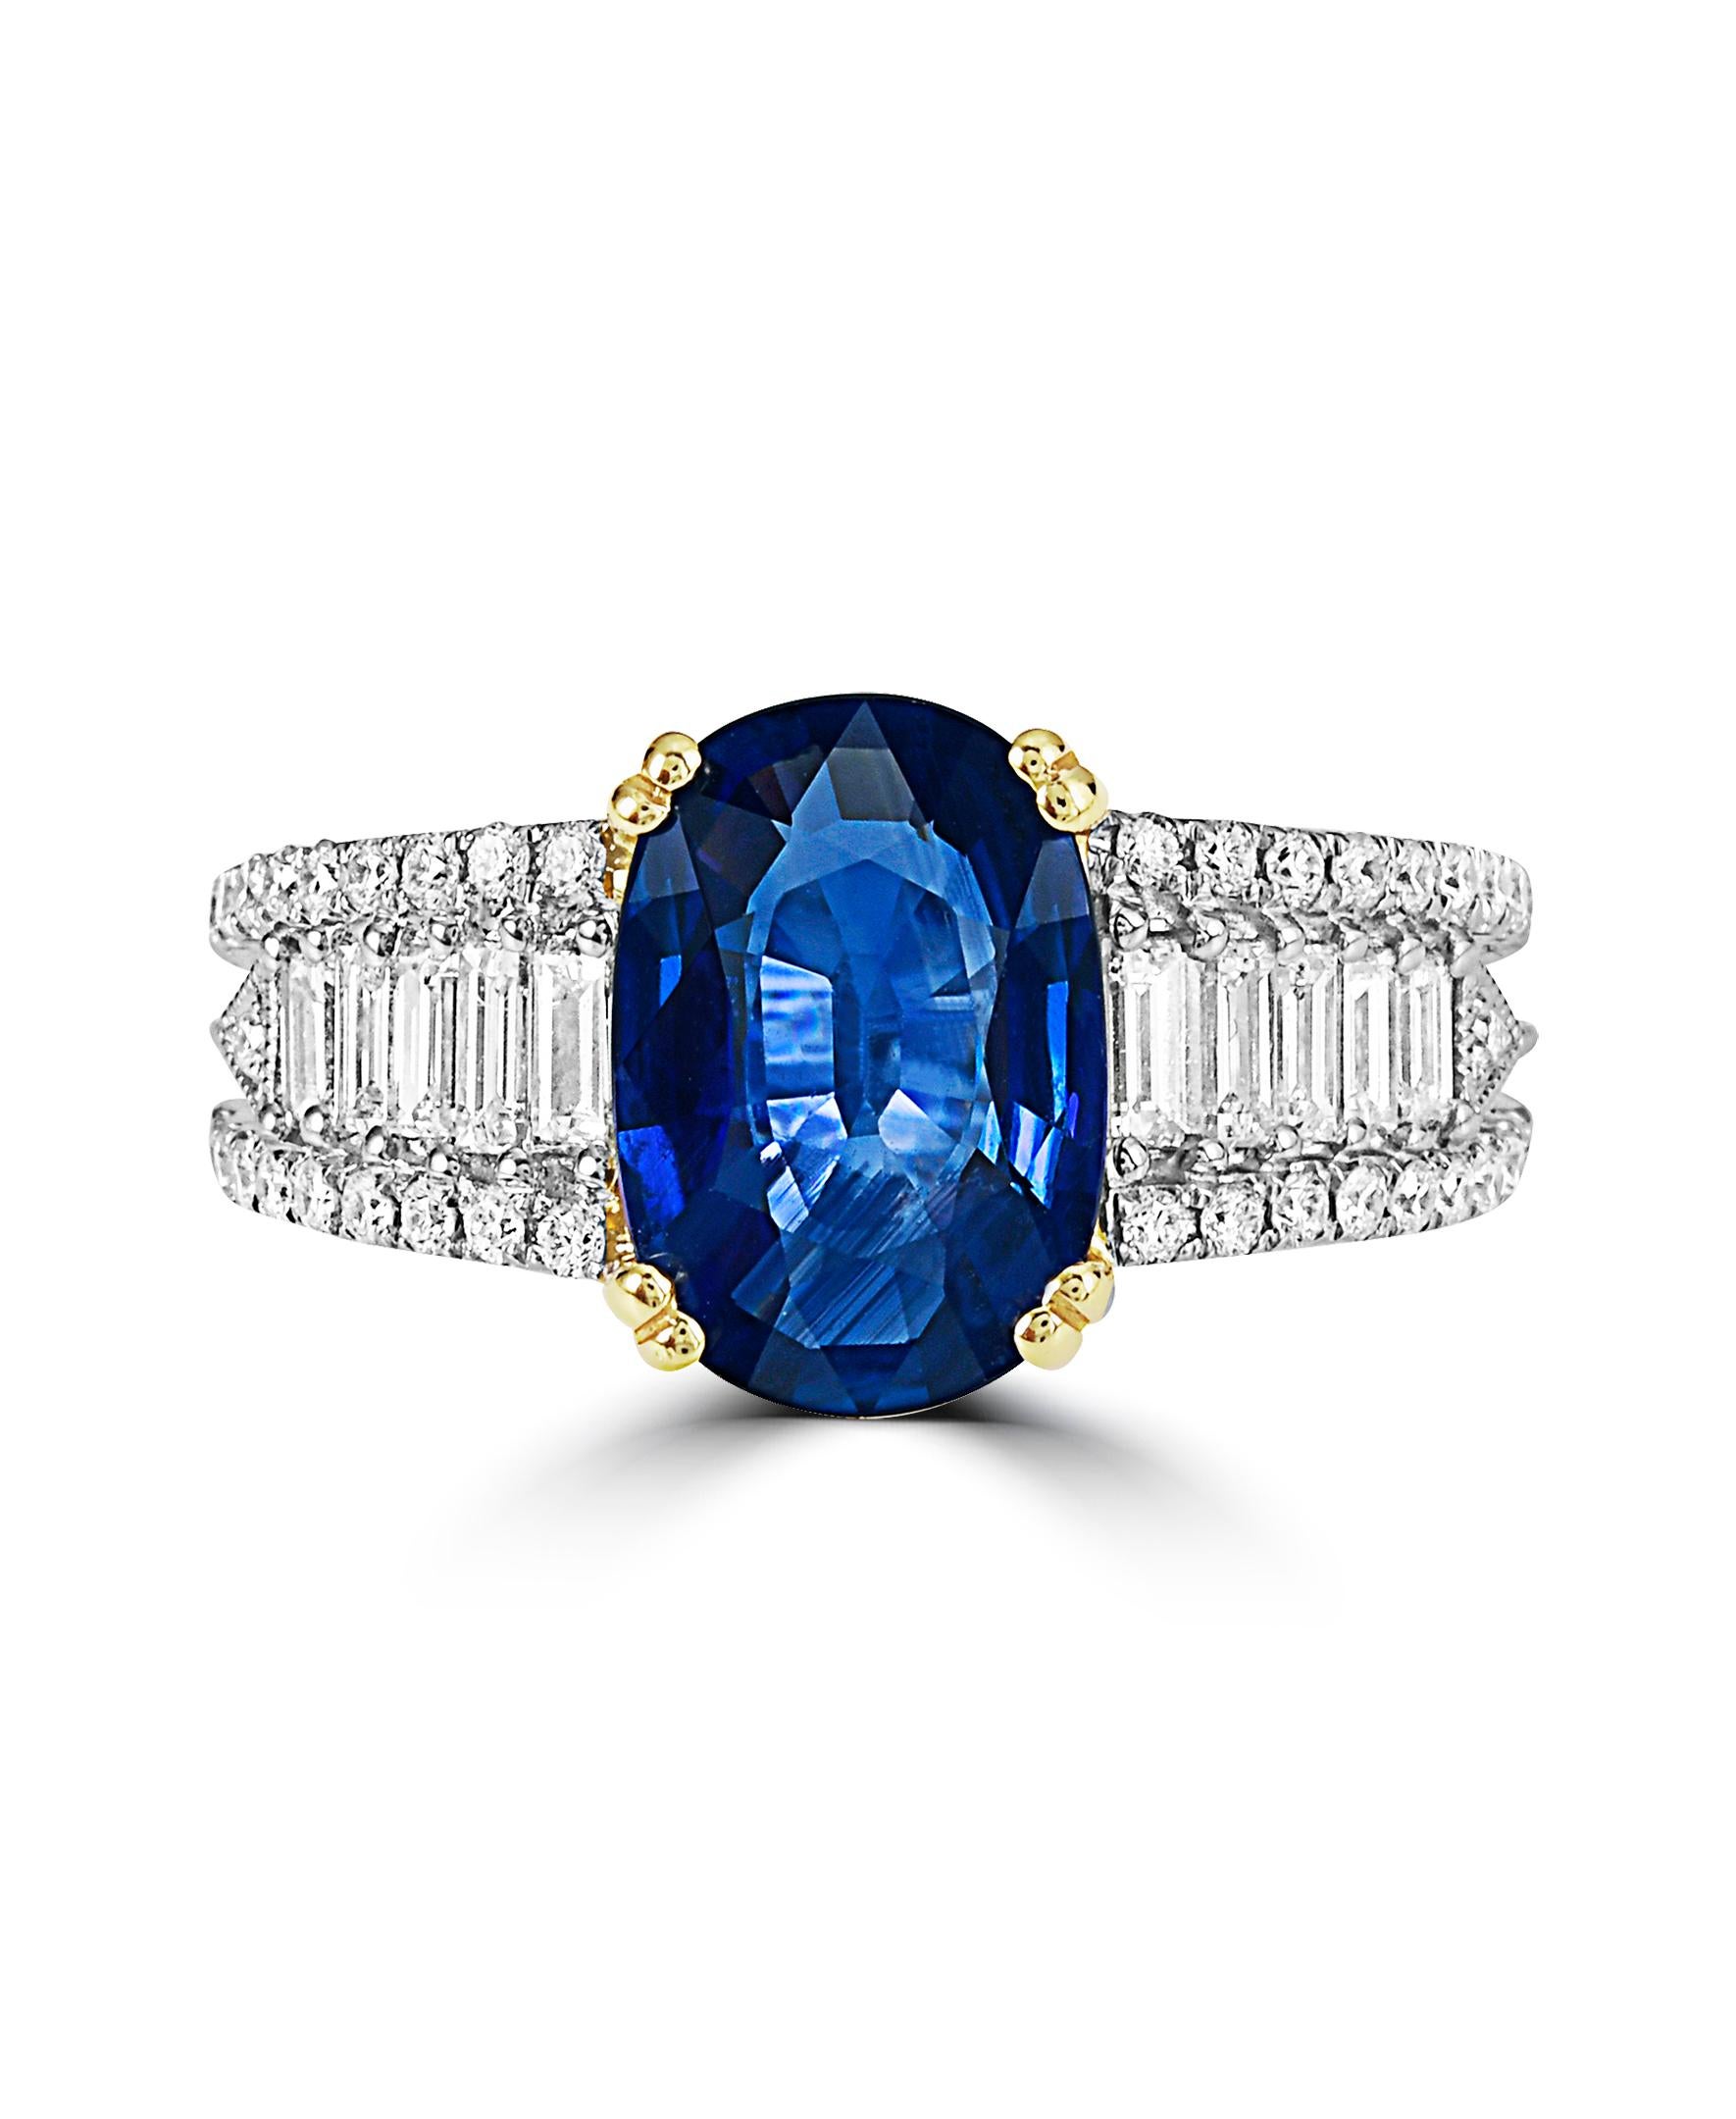 This Effy Hematian Collection design ring is set in 18K White & Yellow gold. The design is set off with a cushion shape Sapphire, with a total weight of 3.07ct.
The diamond accent stones are baguette and round in shape, with a selection of yellow